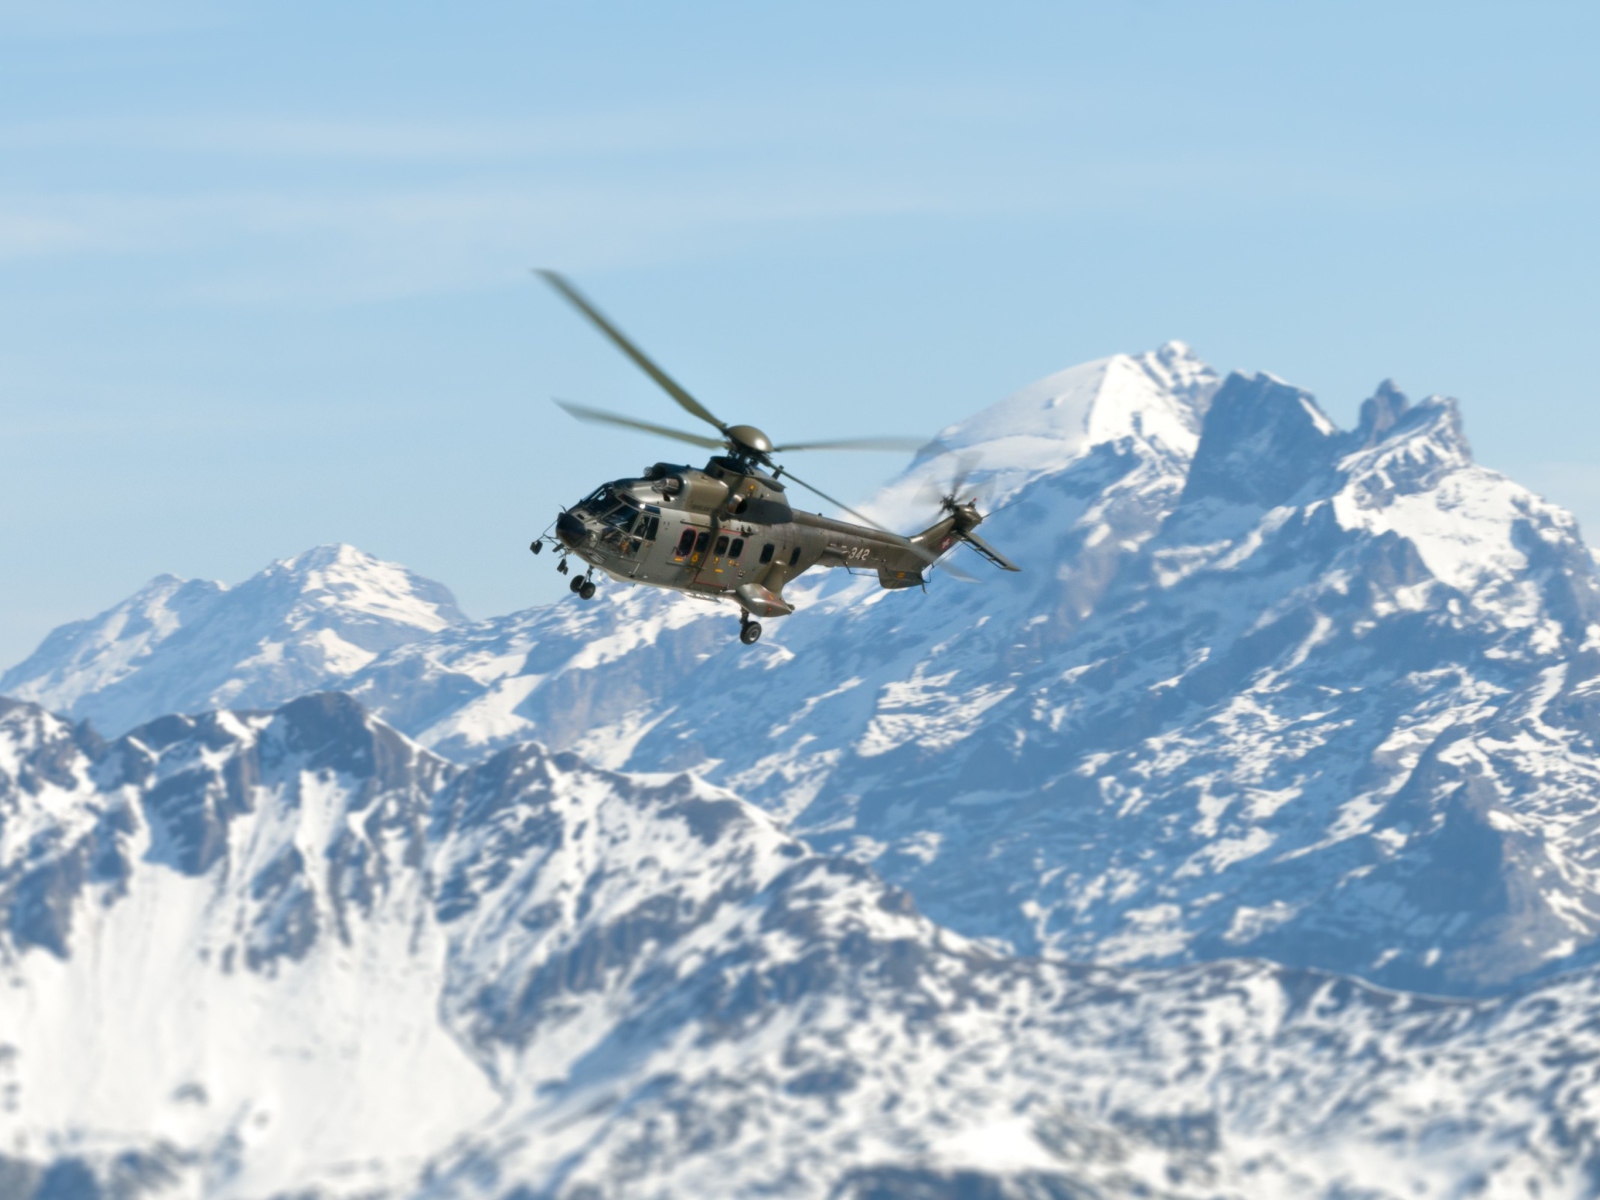 Helicopter Over Snowy Mountains wallpaper 1600x1200